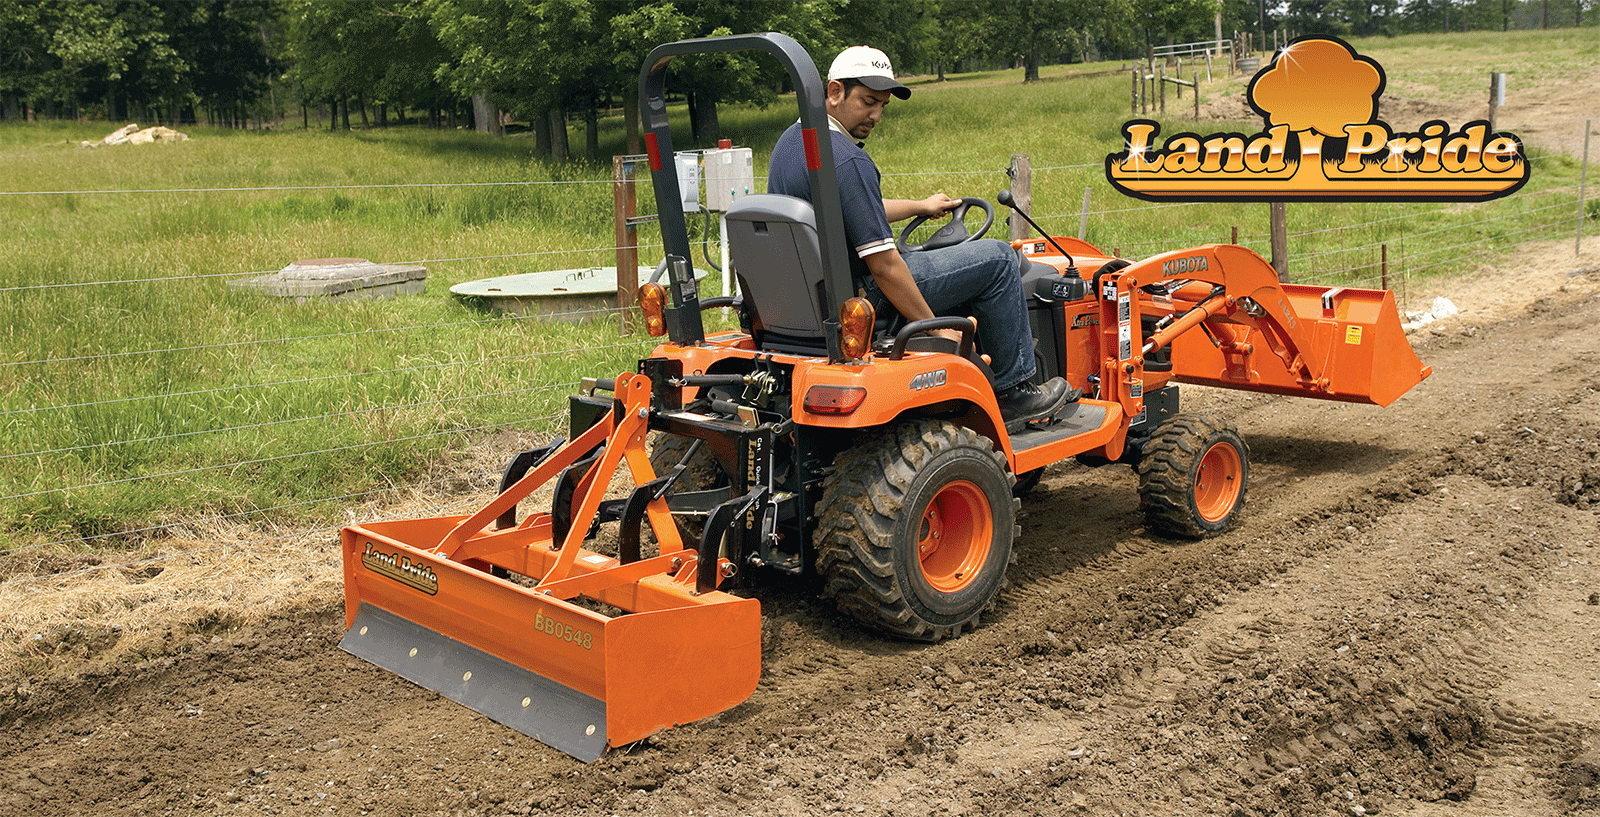 No matter what attachments you need, you’ll never go wrong with Land Pride. That’s a promise.